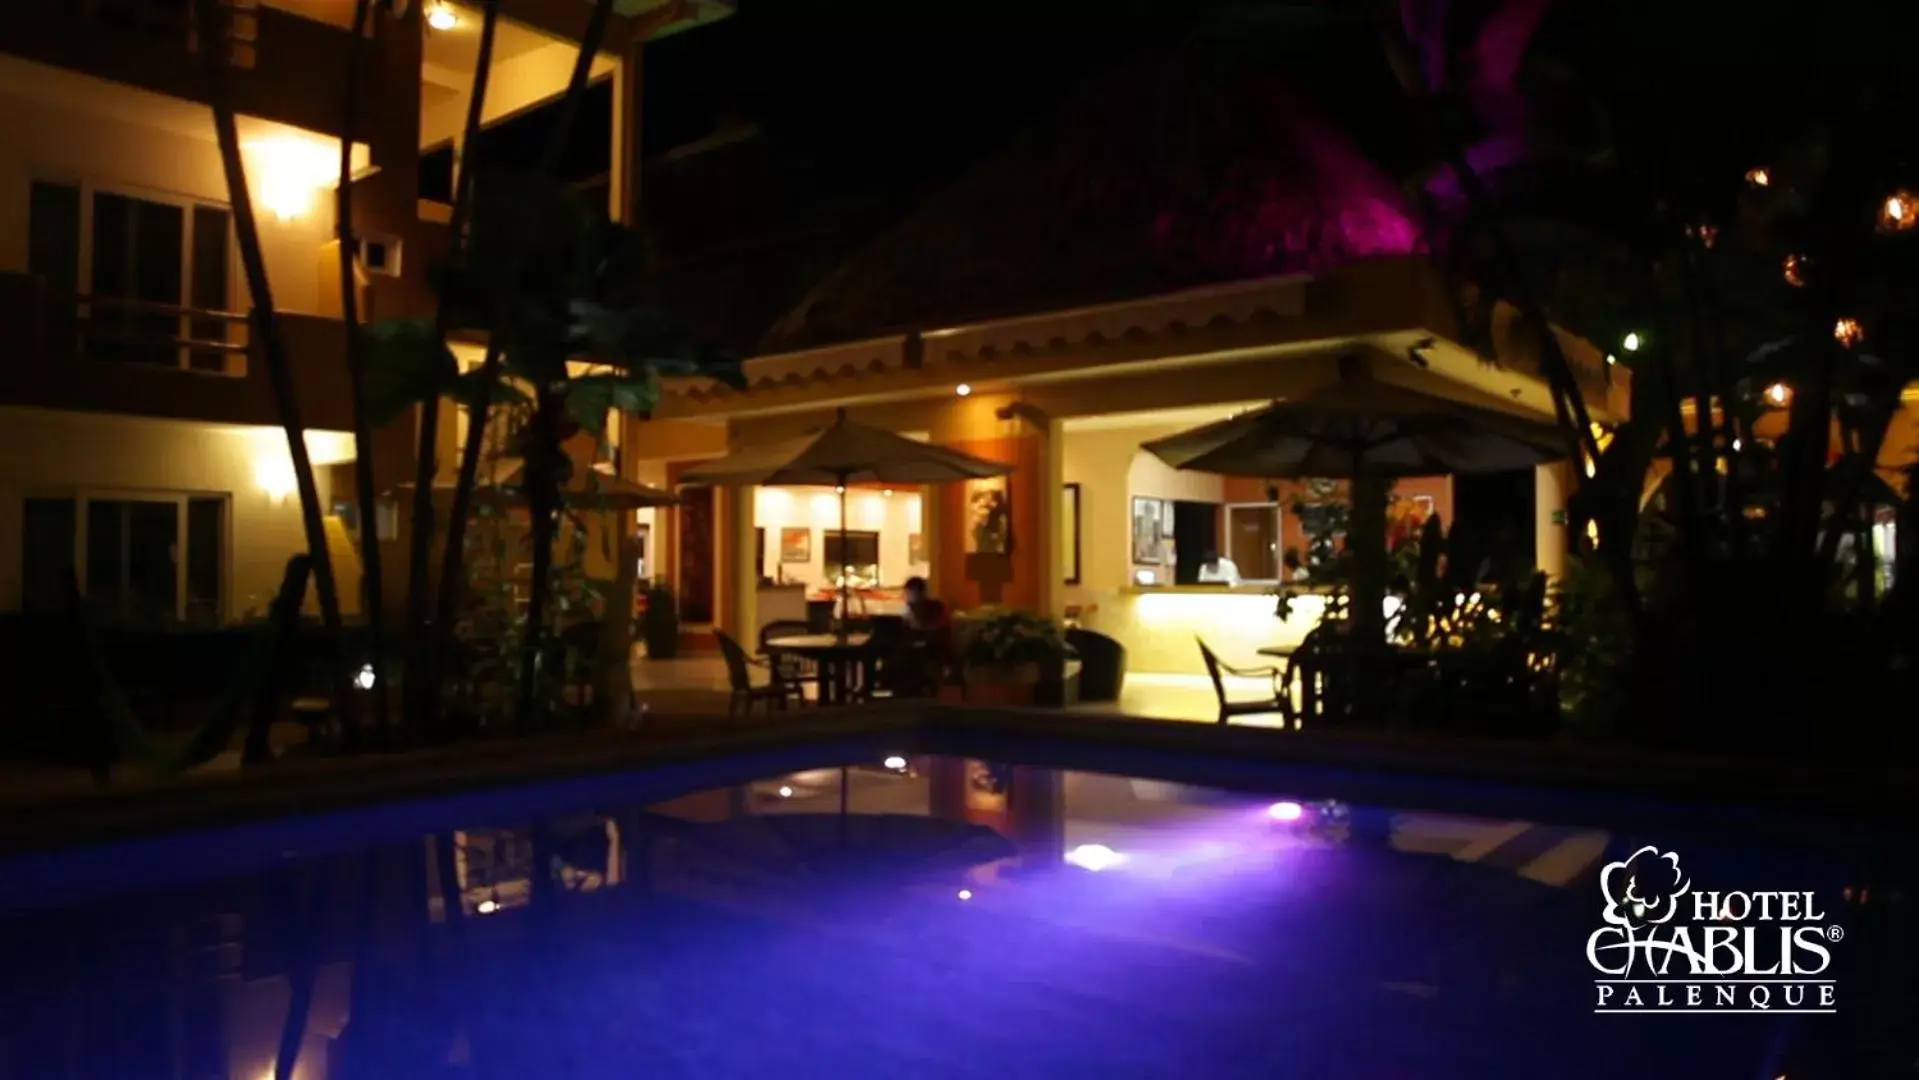 Property building, Swimming Pool in Hotel Chablis Palenque